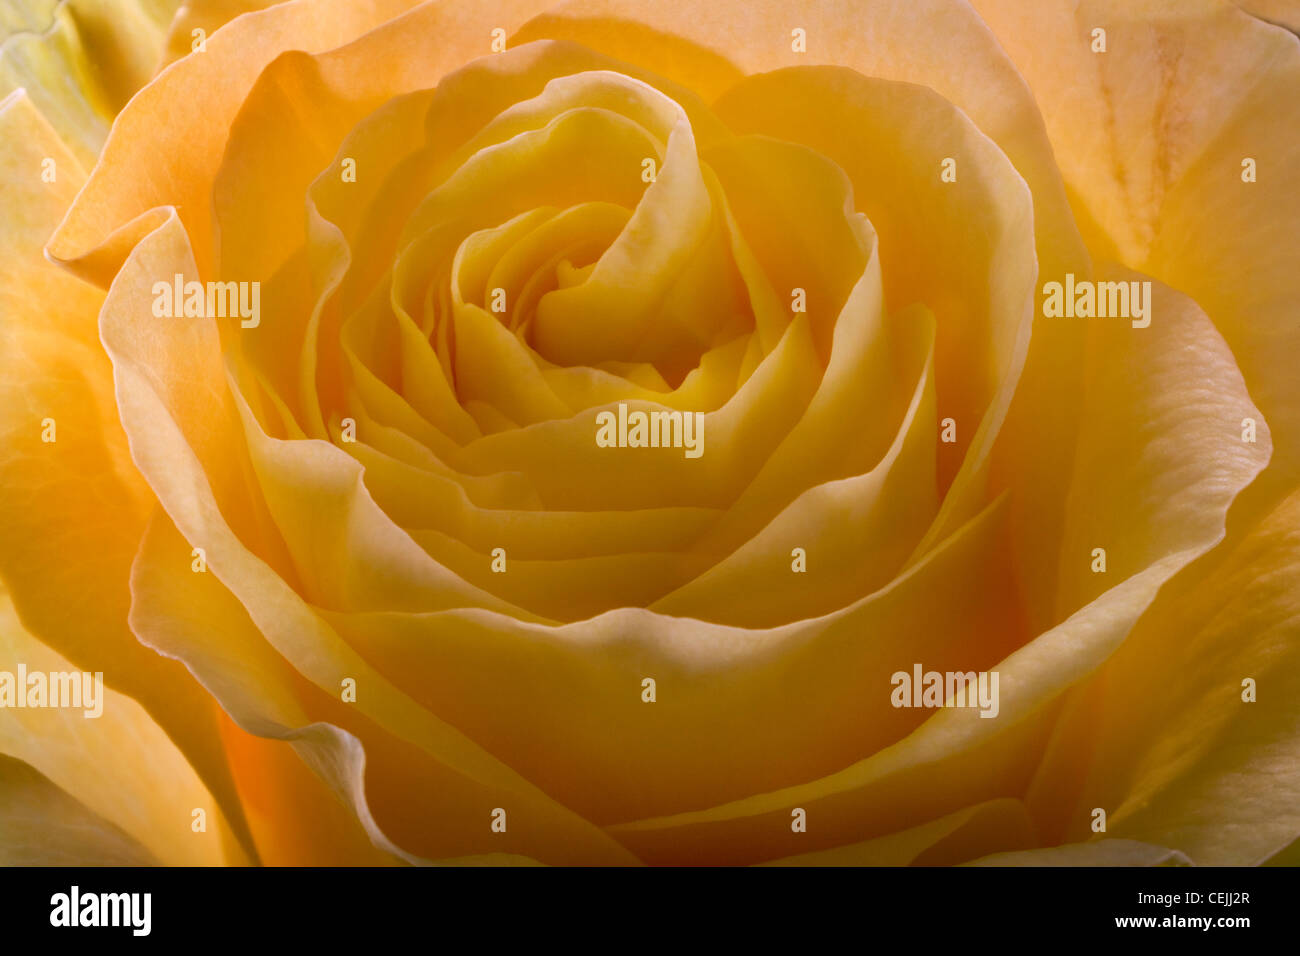 Yellow rose close-up as romantic flower Stock Photo